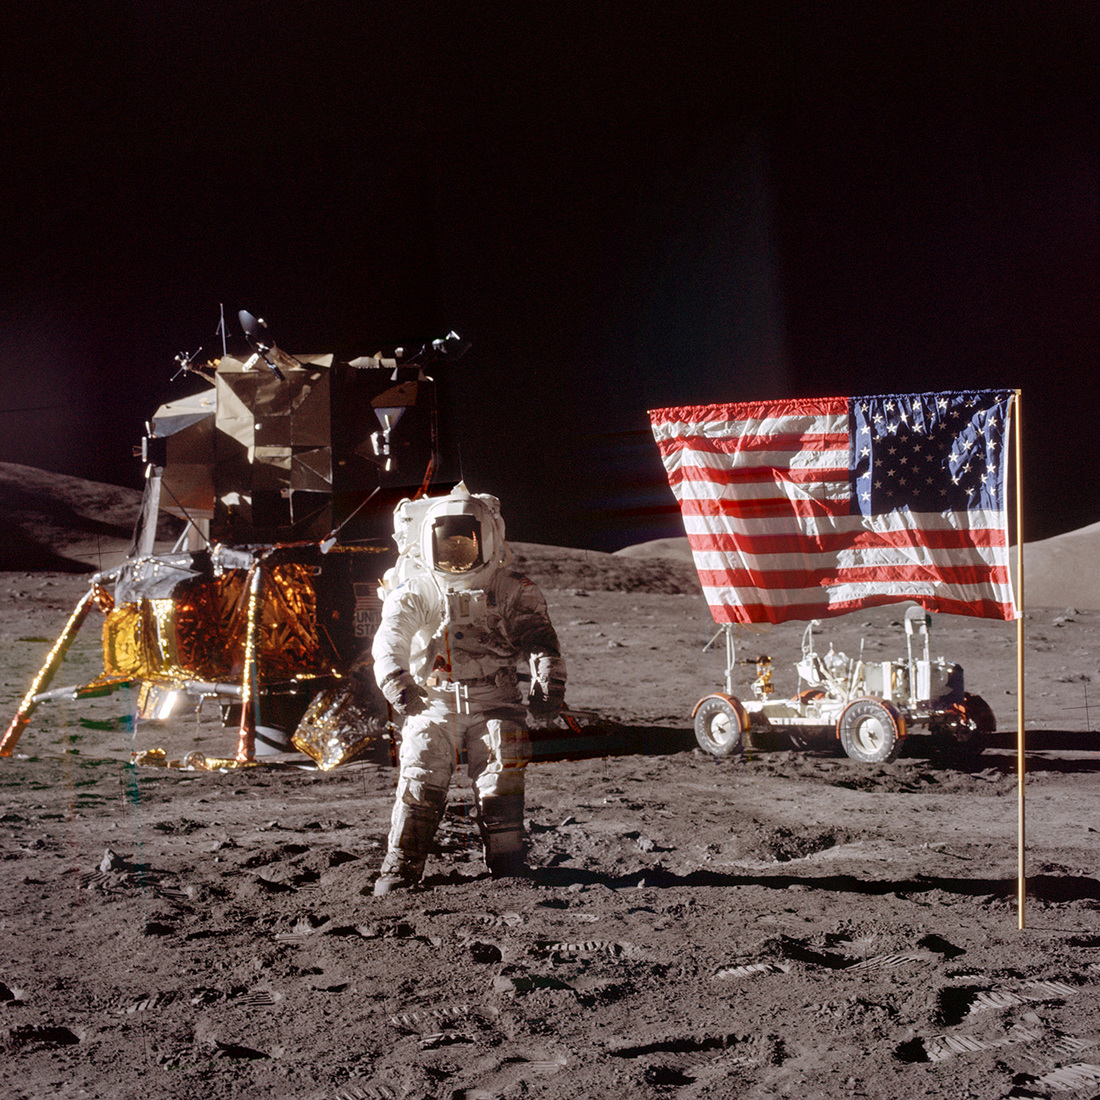 Apollo 17 Remains Unchallenged After Fifty Years